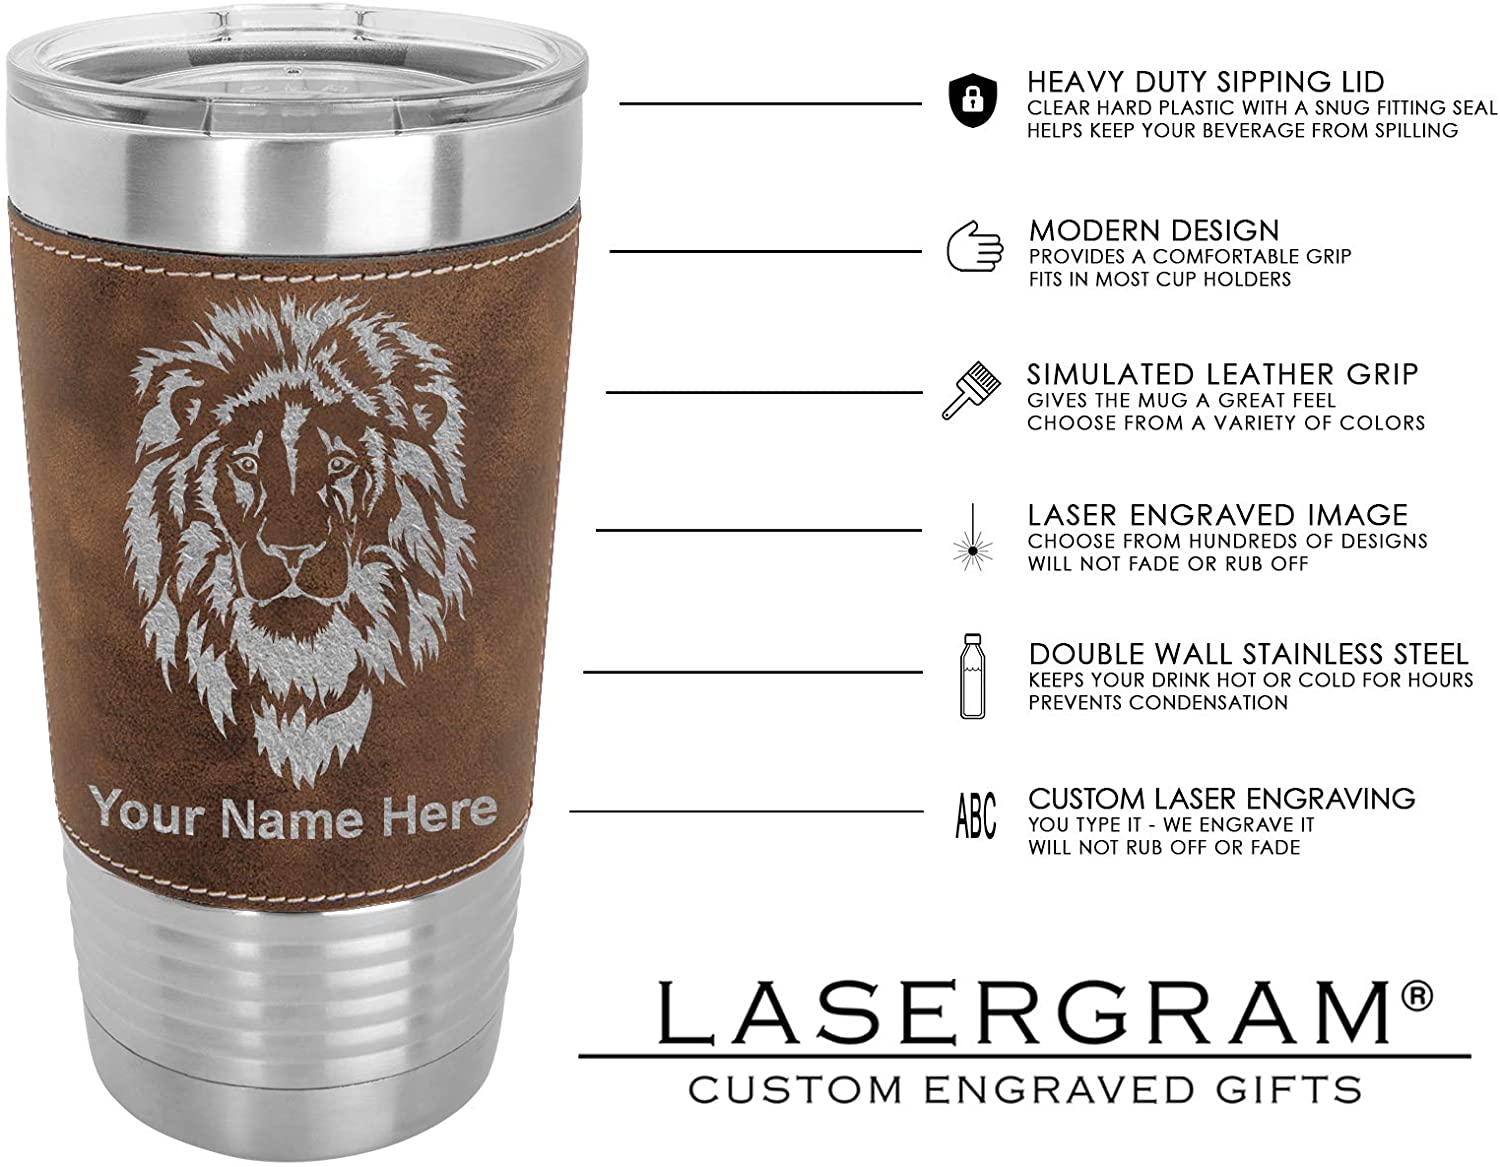 Insulated Stainless Steel Mug - Horse Designs 3